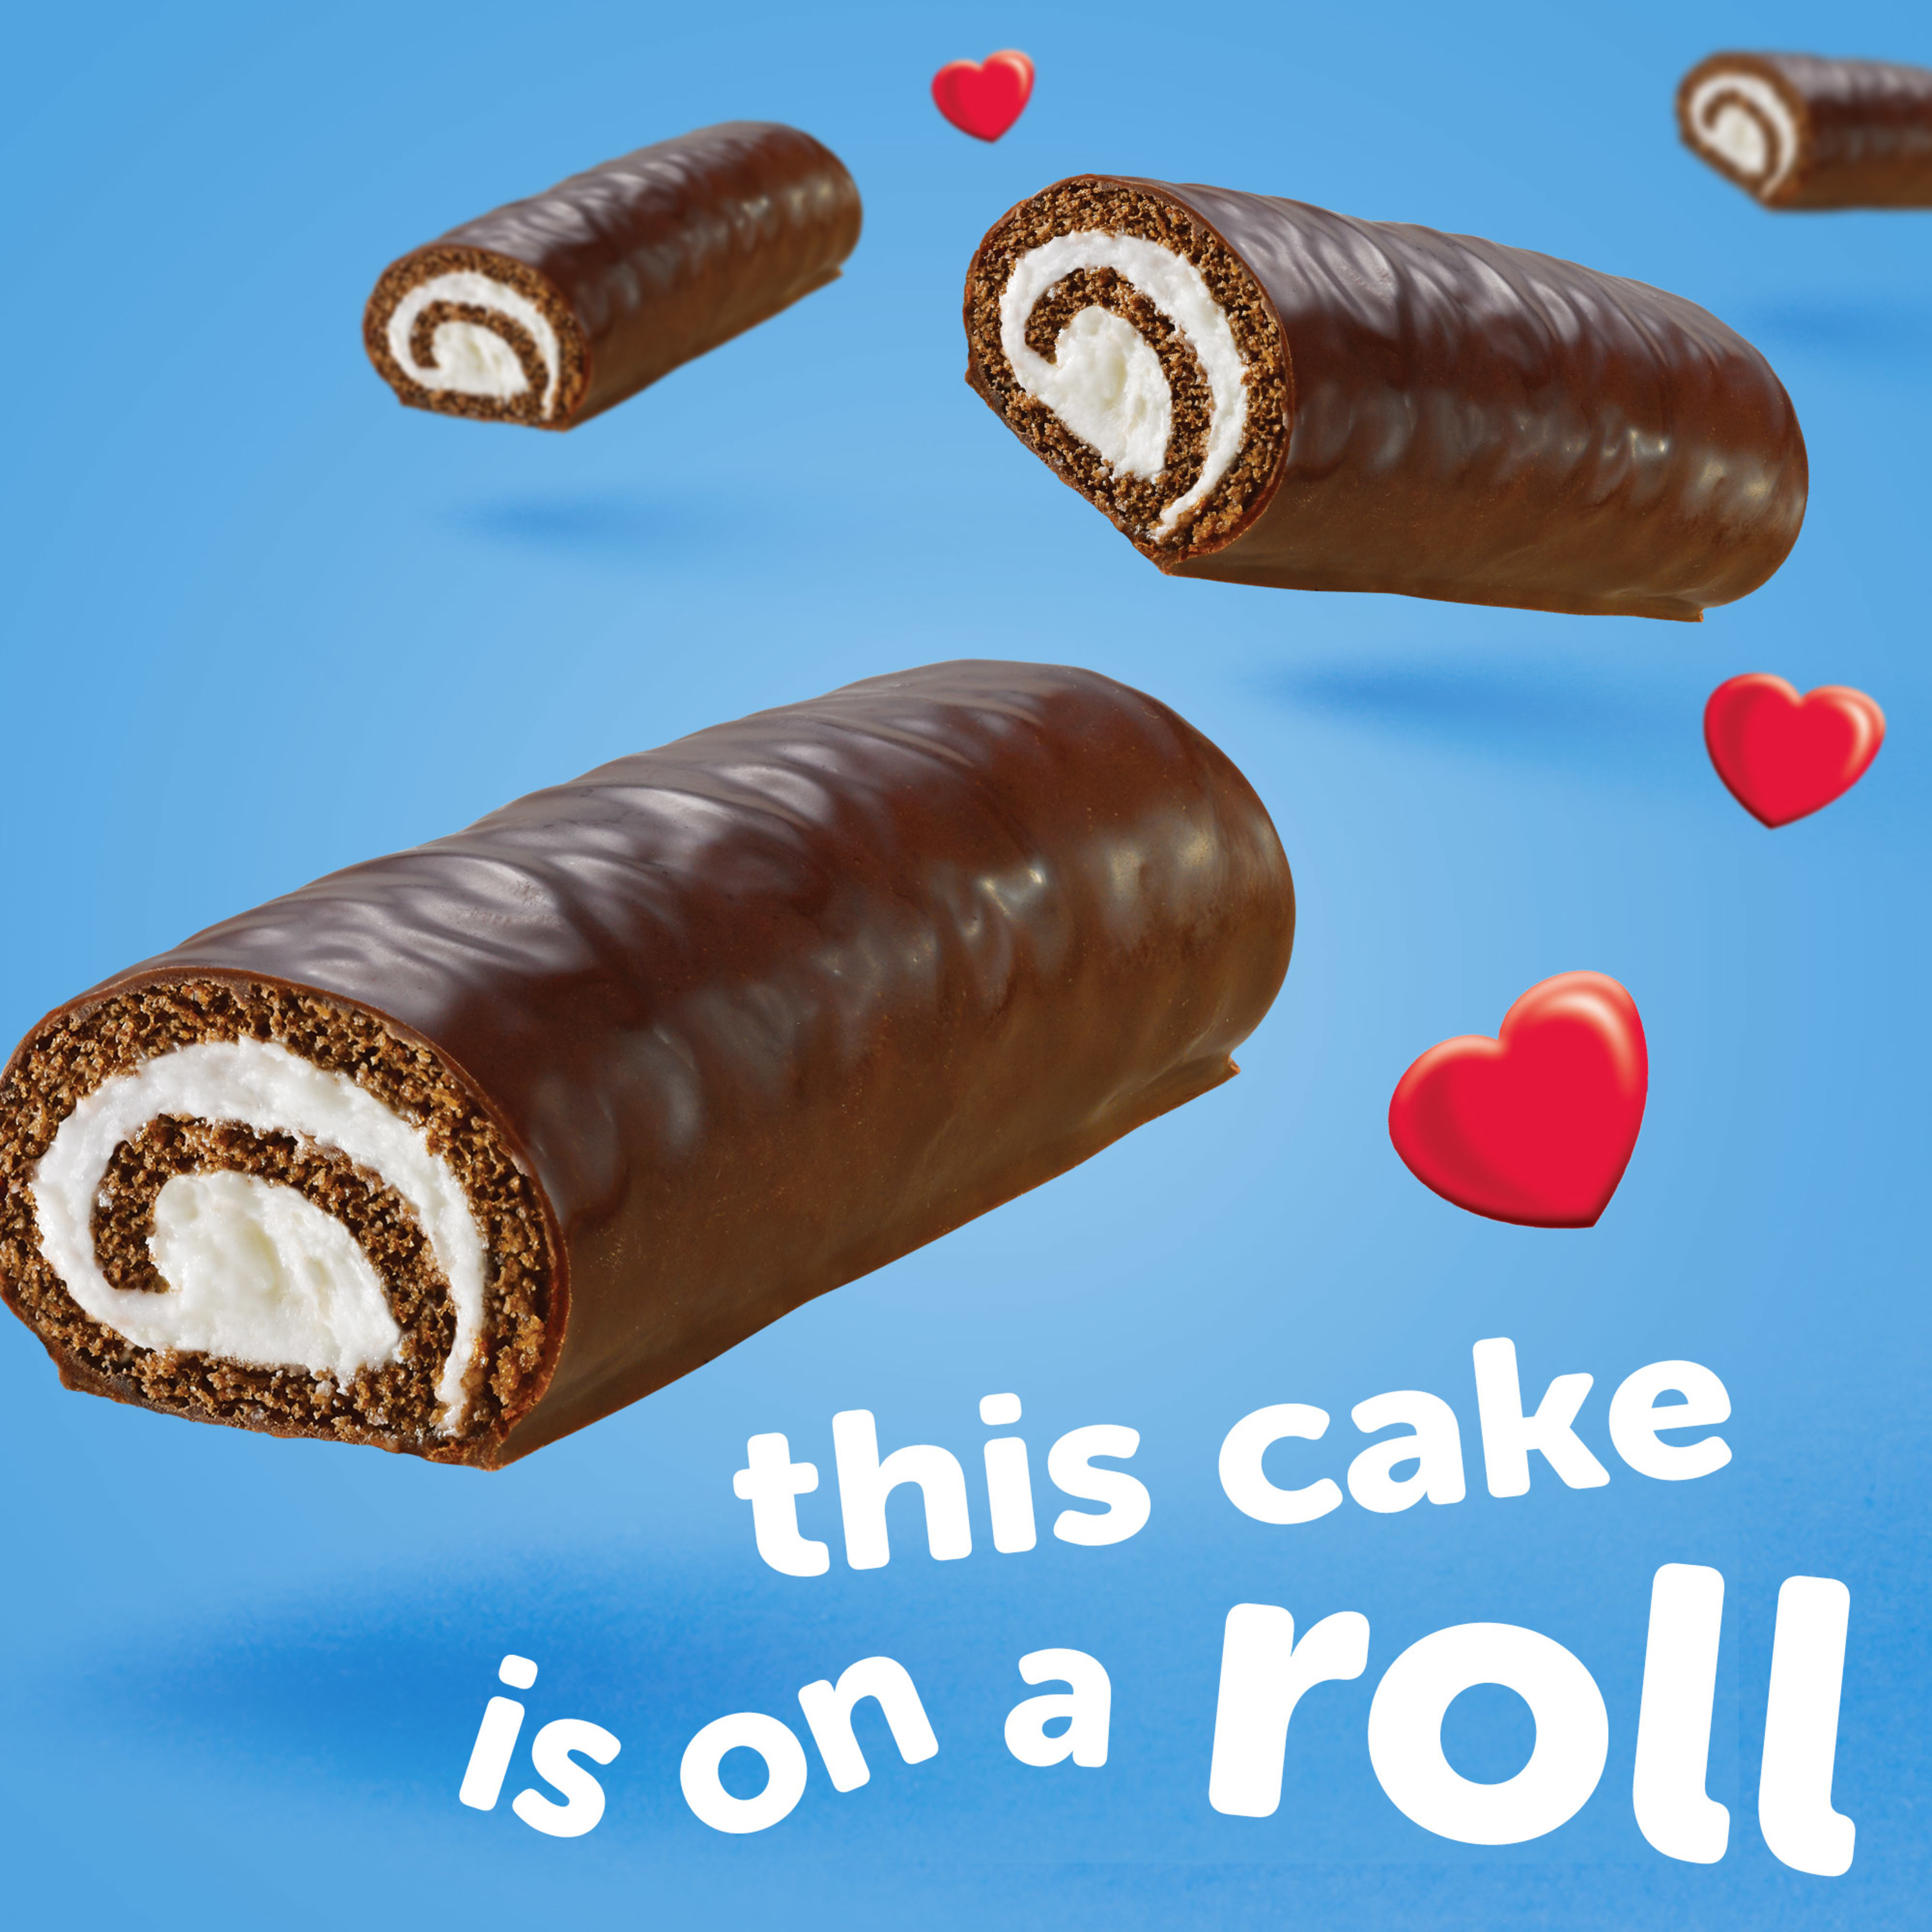 HOSTESS HOHOS, Rolled Chocolate Cake with Creamy Filling, Individually Wrapped - 10 Count /10 oz - image 2 of 18